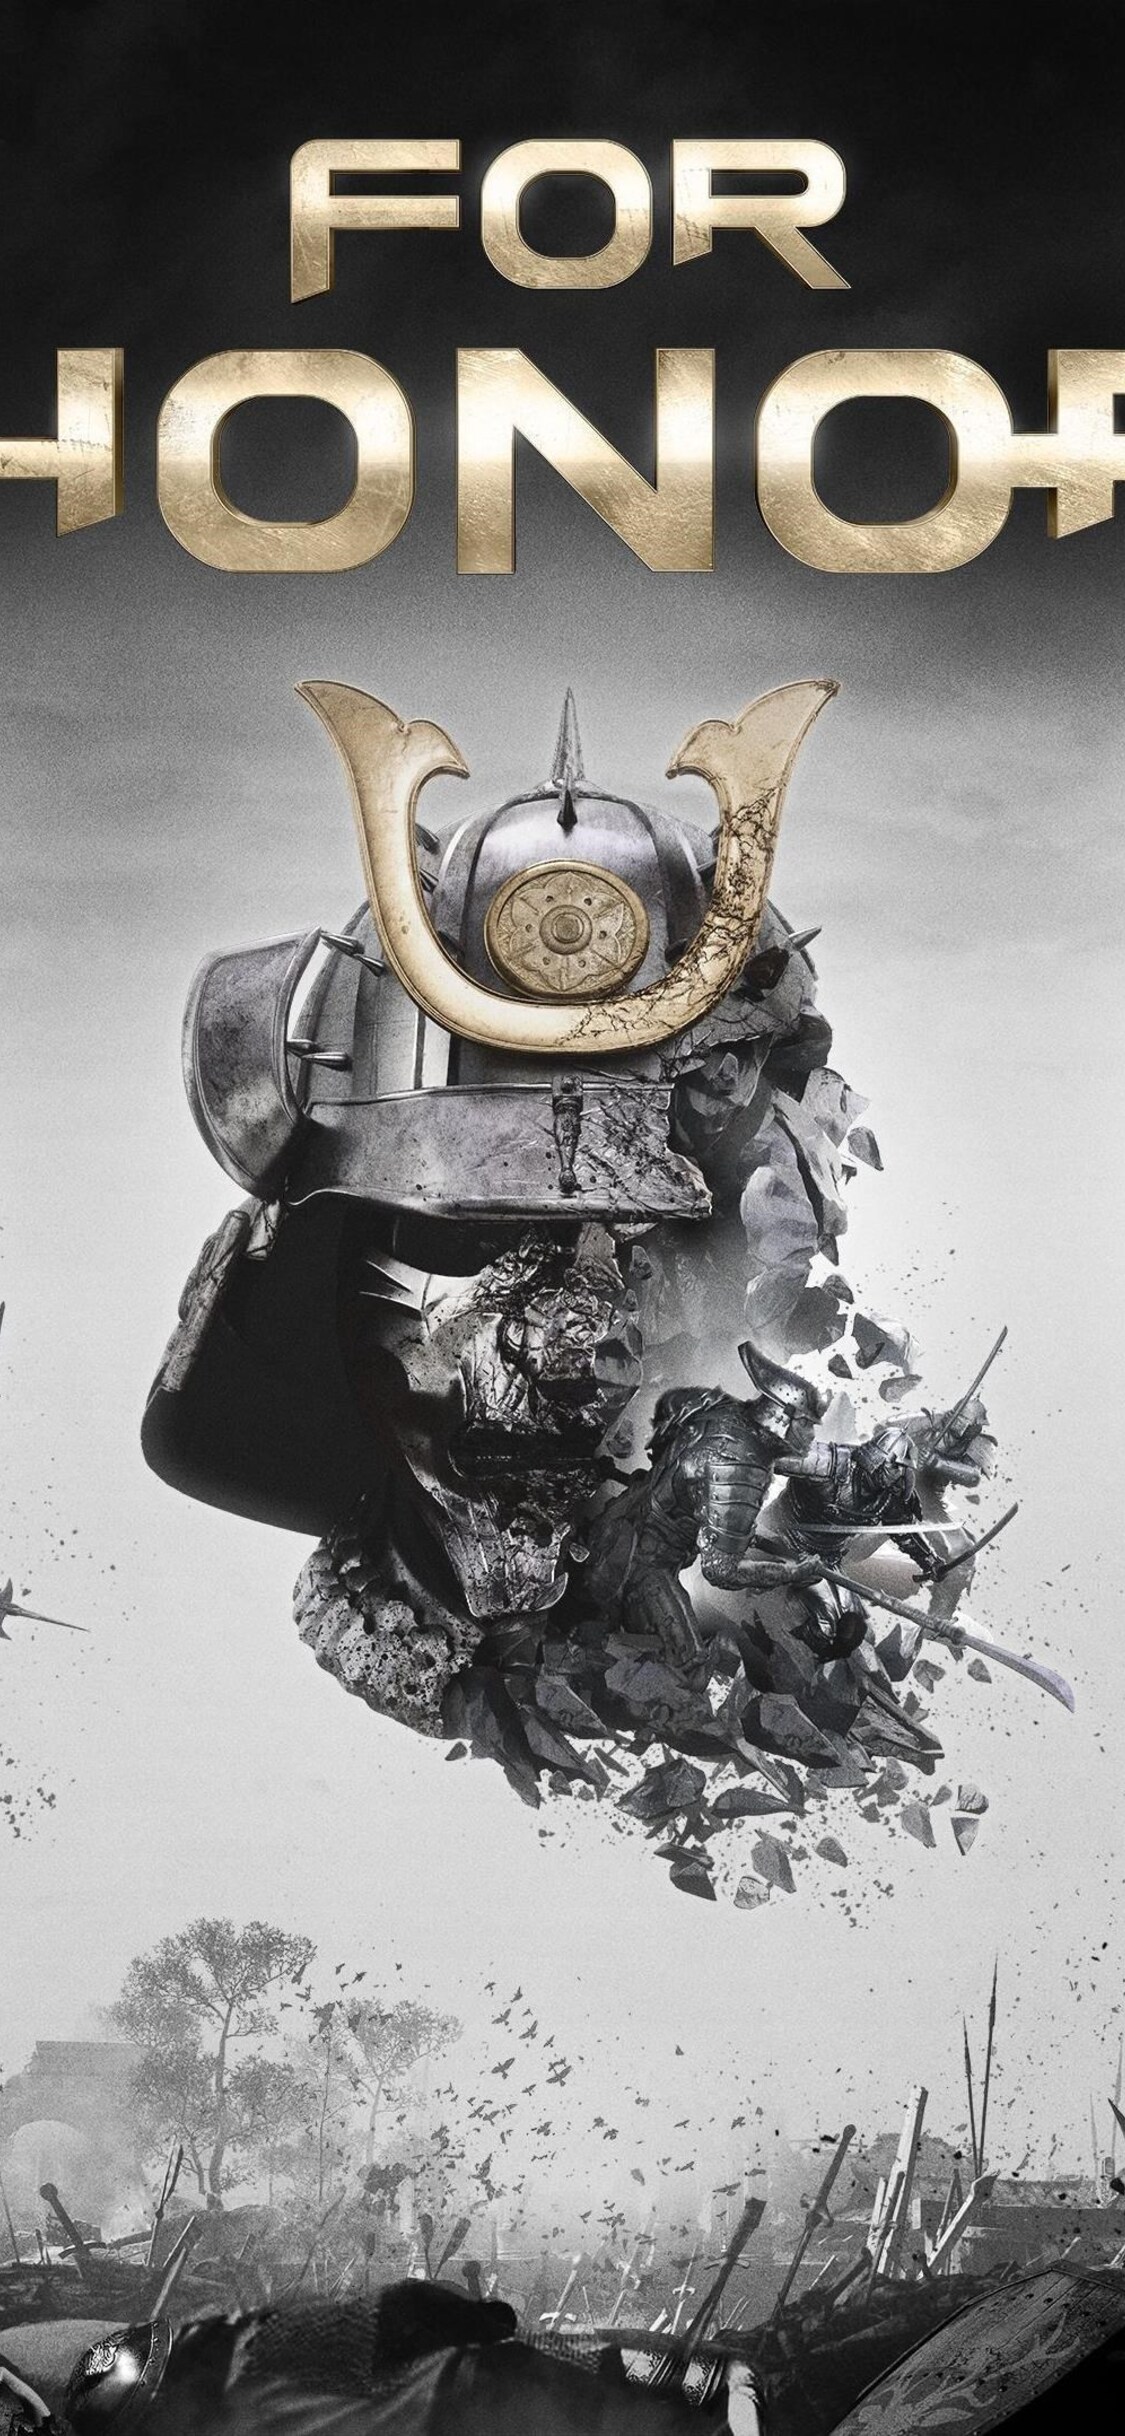 Iphone X For Honor Wallpapers